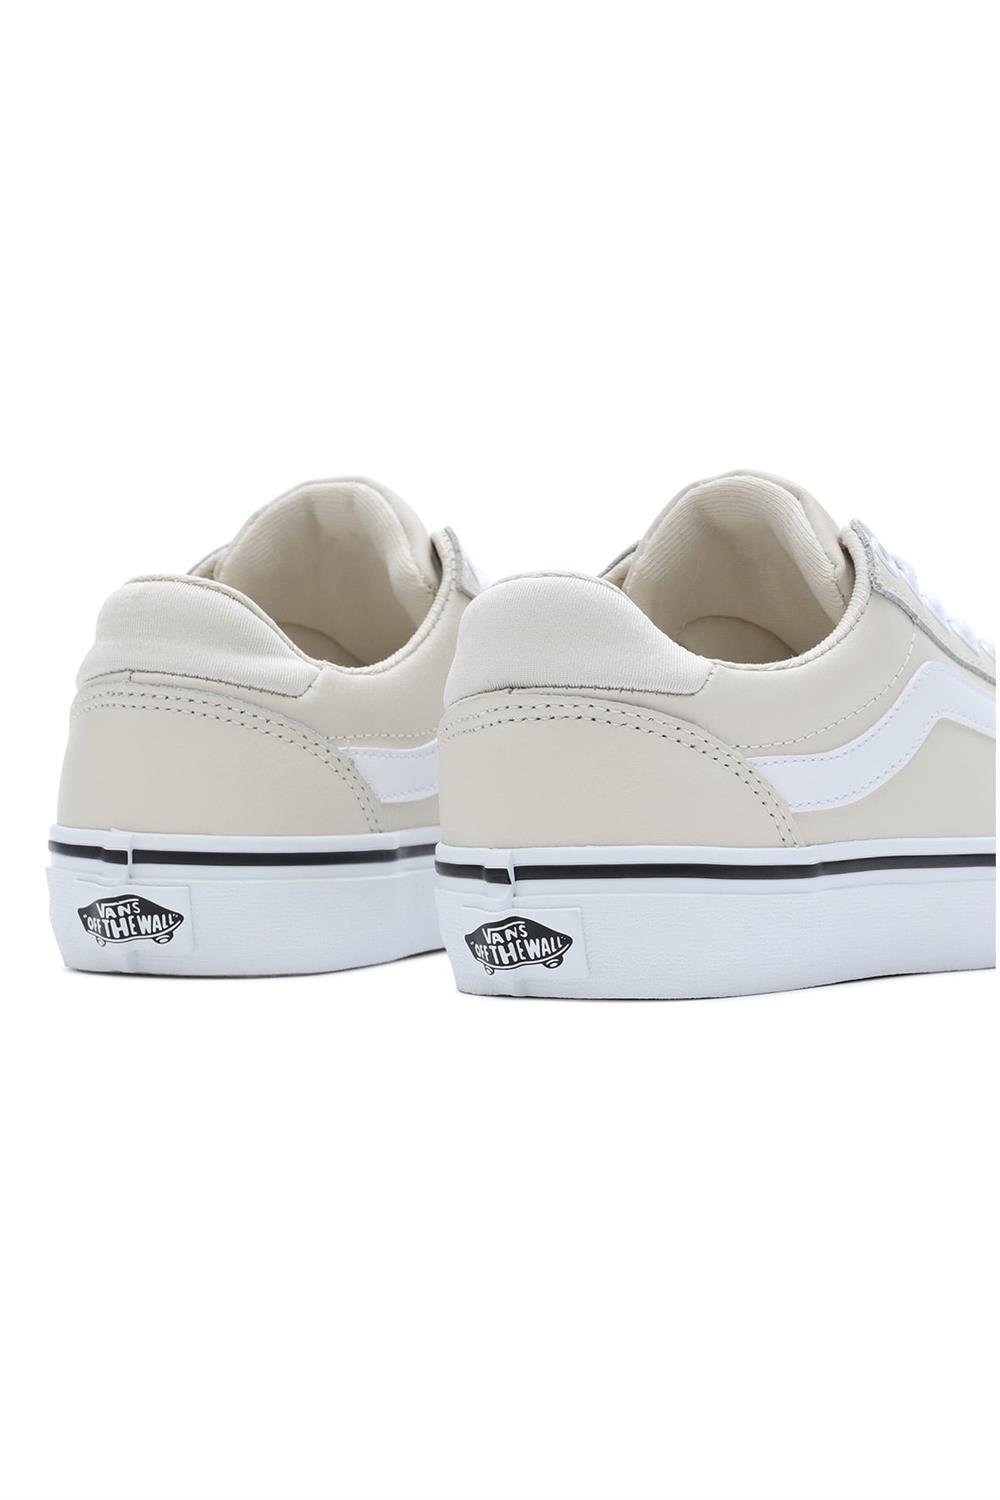 Ward Deluxe Birch Tumble Leather Trainers-Back heel view